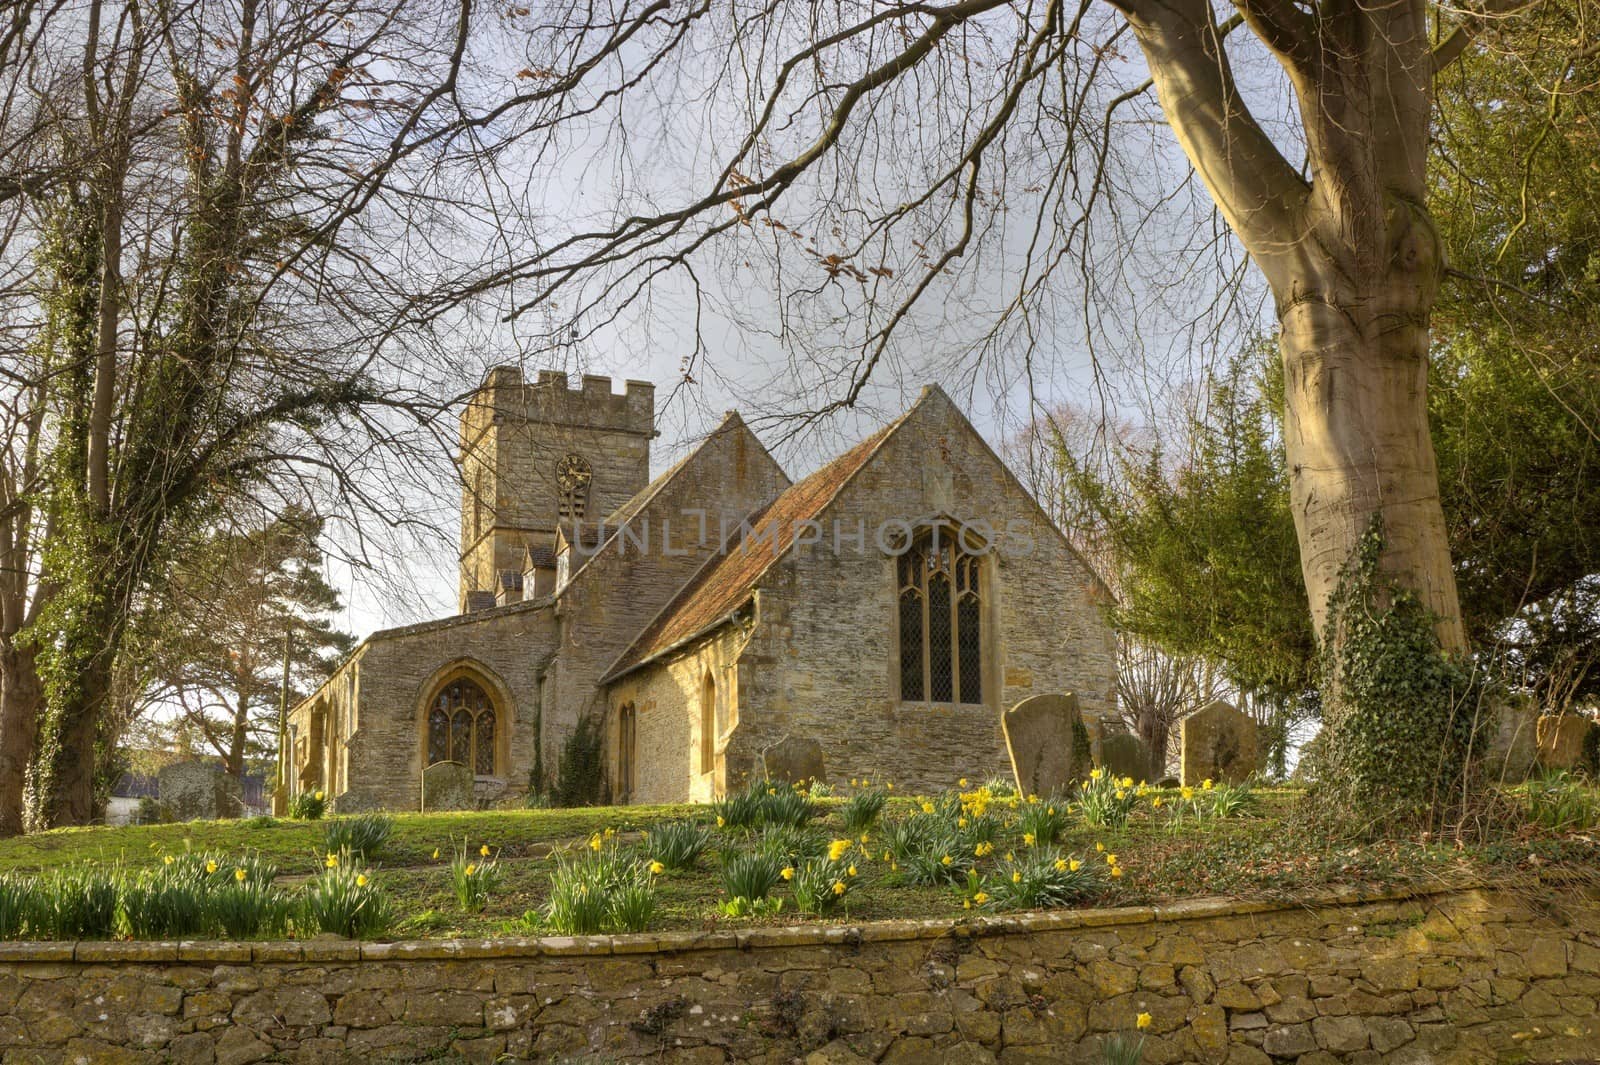 Pretty Worcestershire church with daffodils at springtime, Pebworth, England.